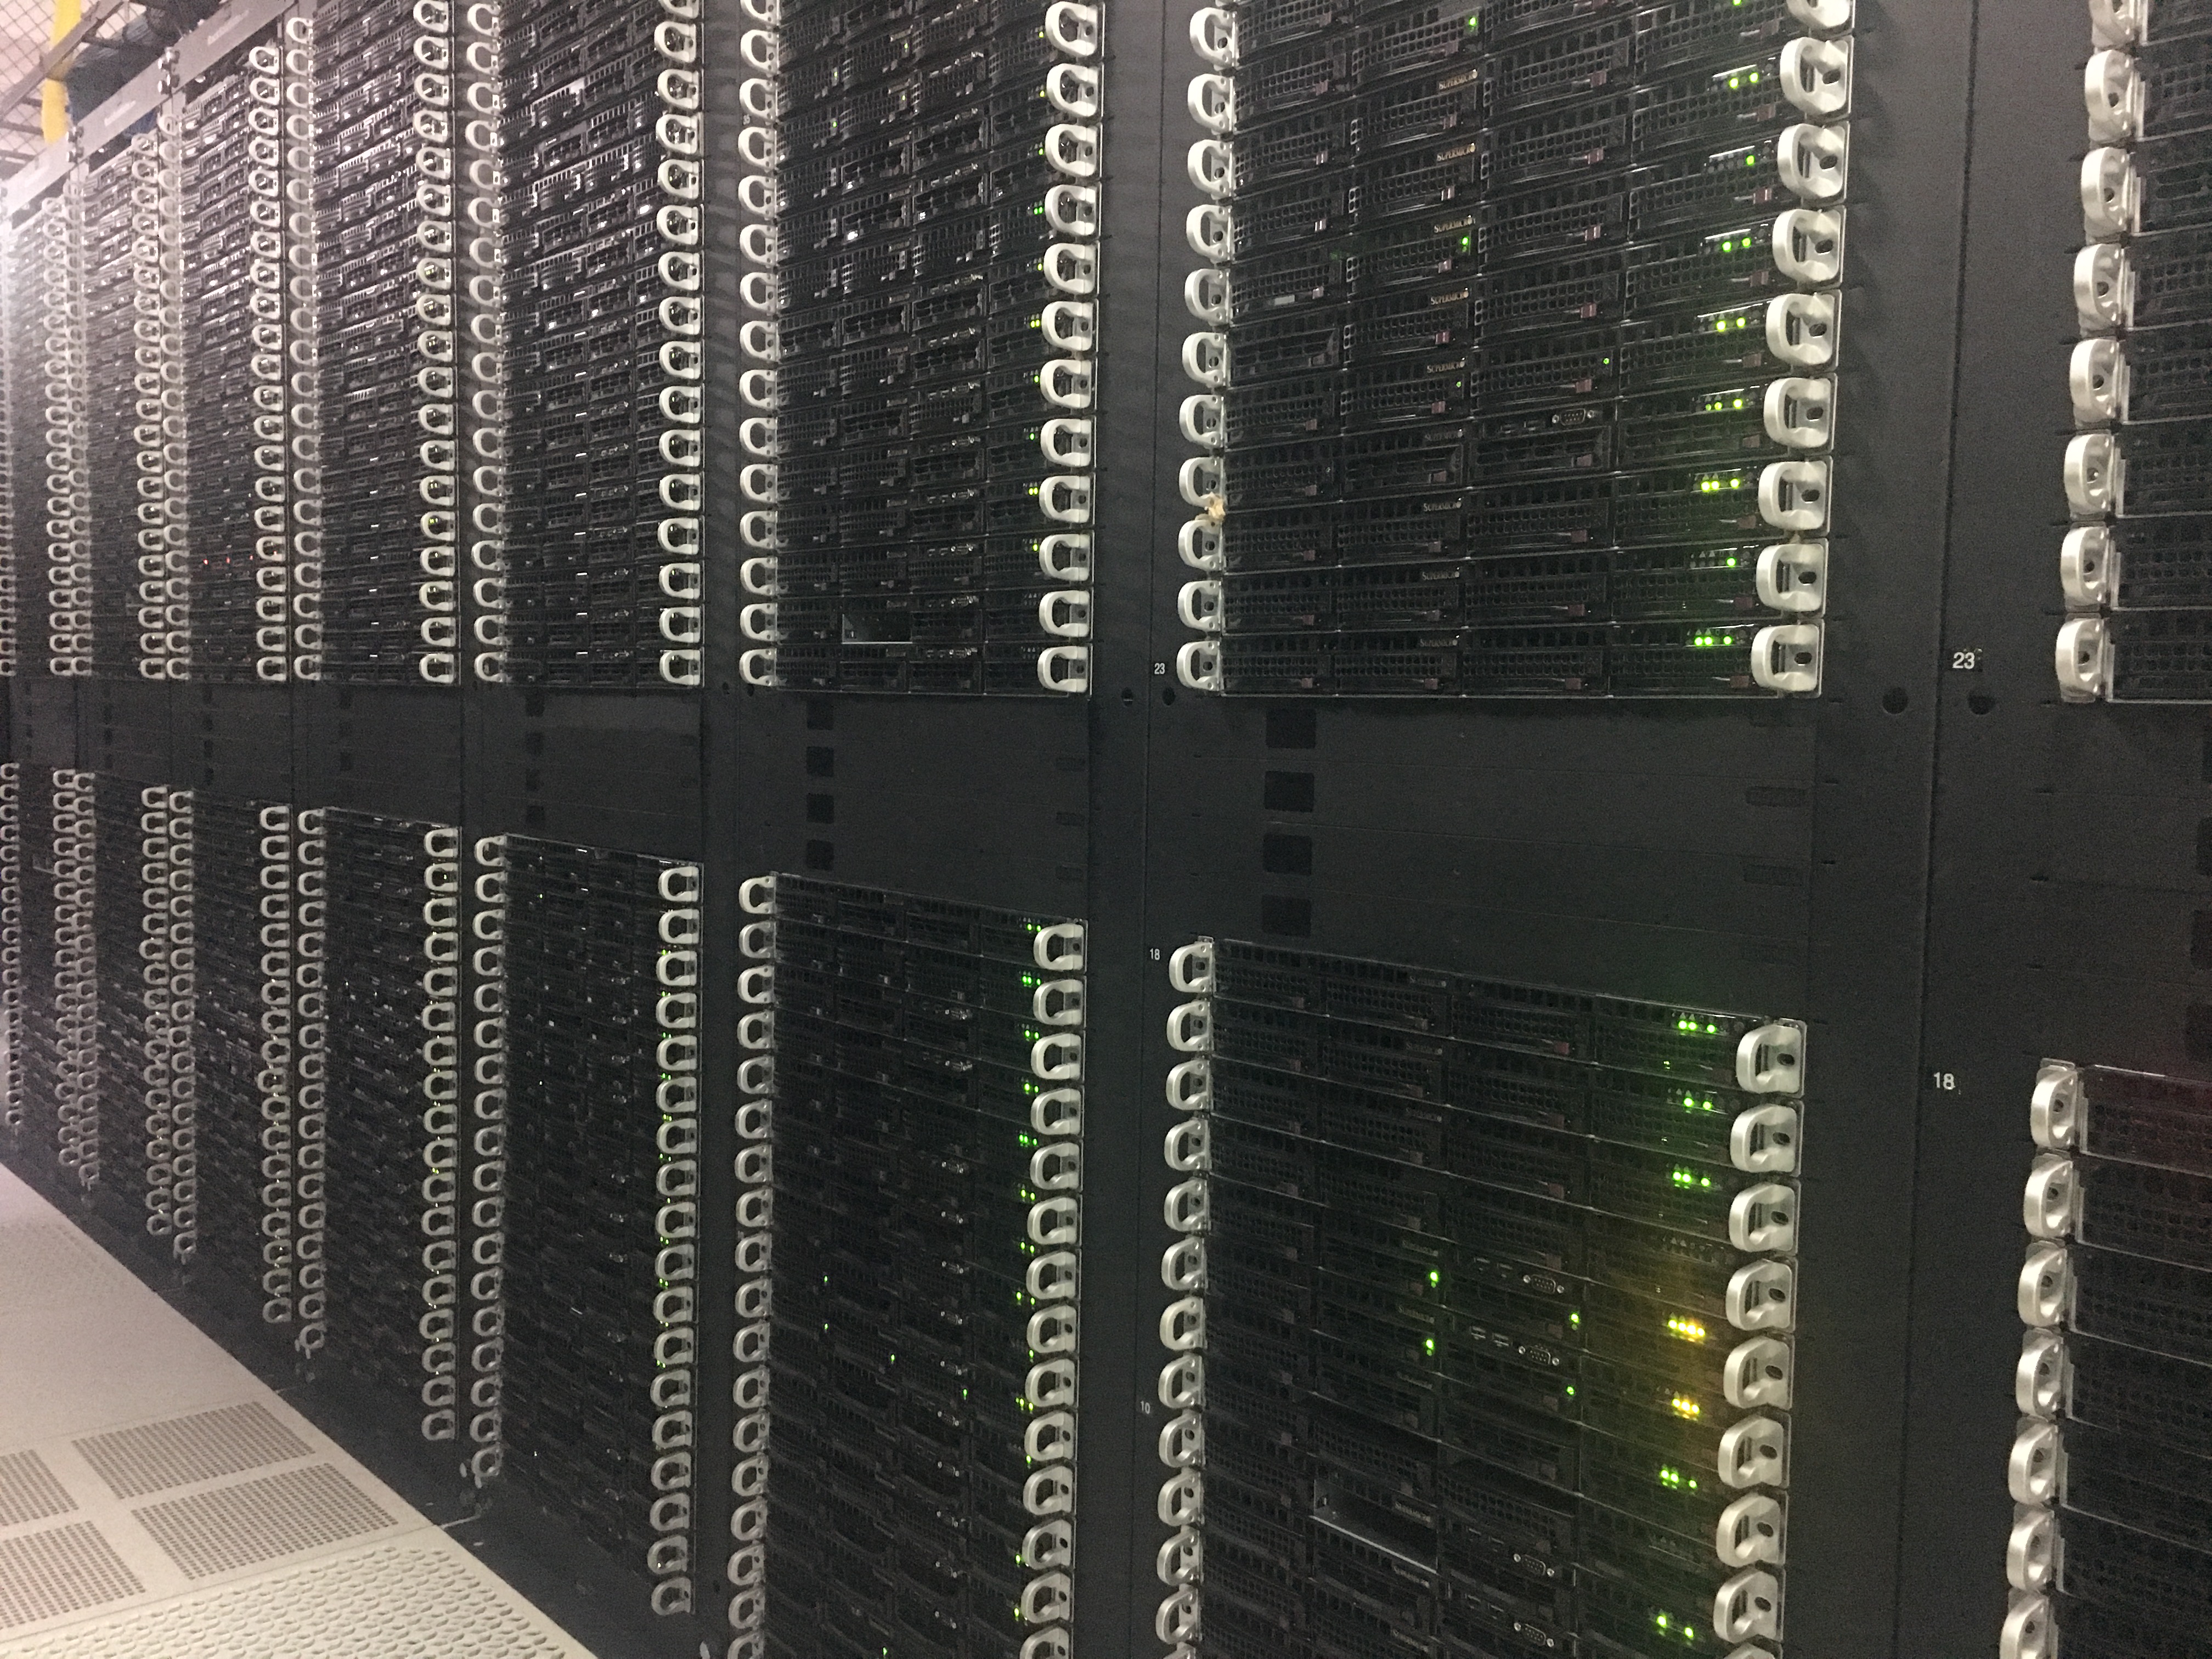 Active Dedicated Server Racks in a Hivelocity Data Center